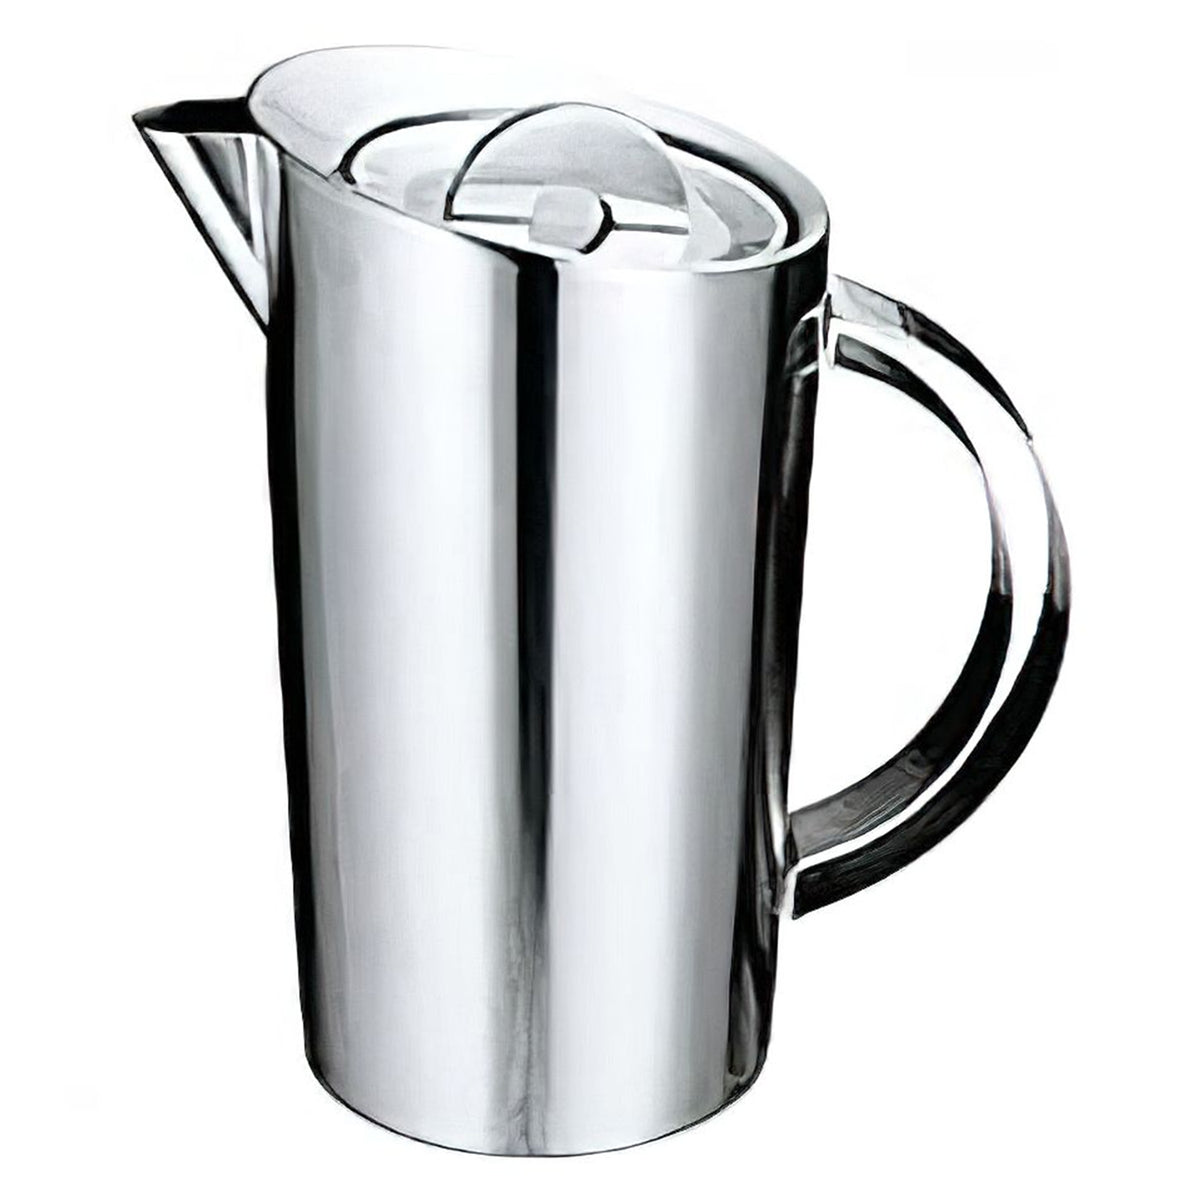 MARUTAMA Stainless Steel Water Pitcher 1.6L